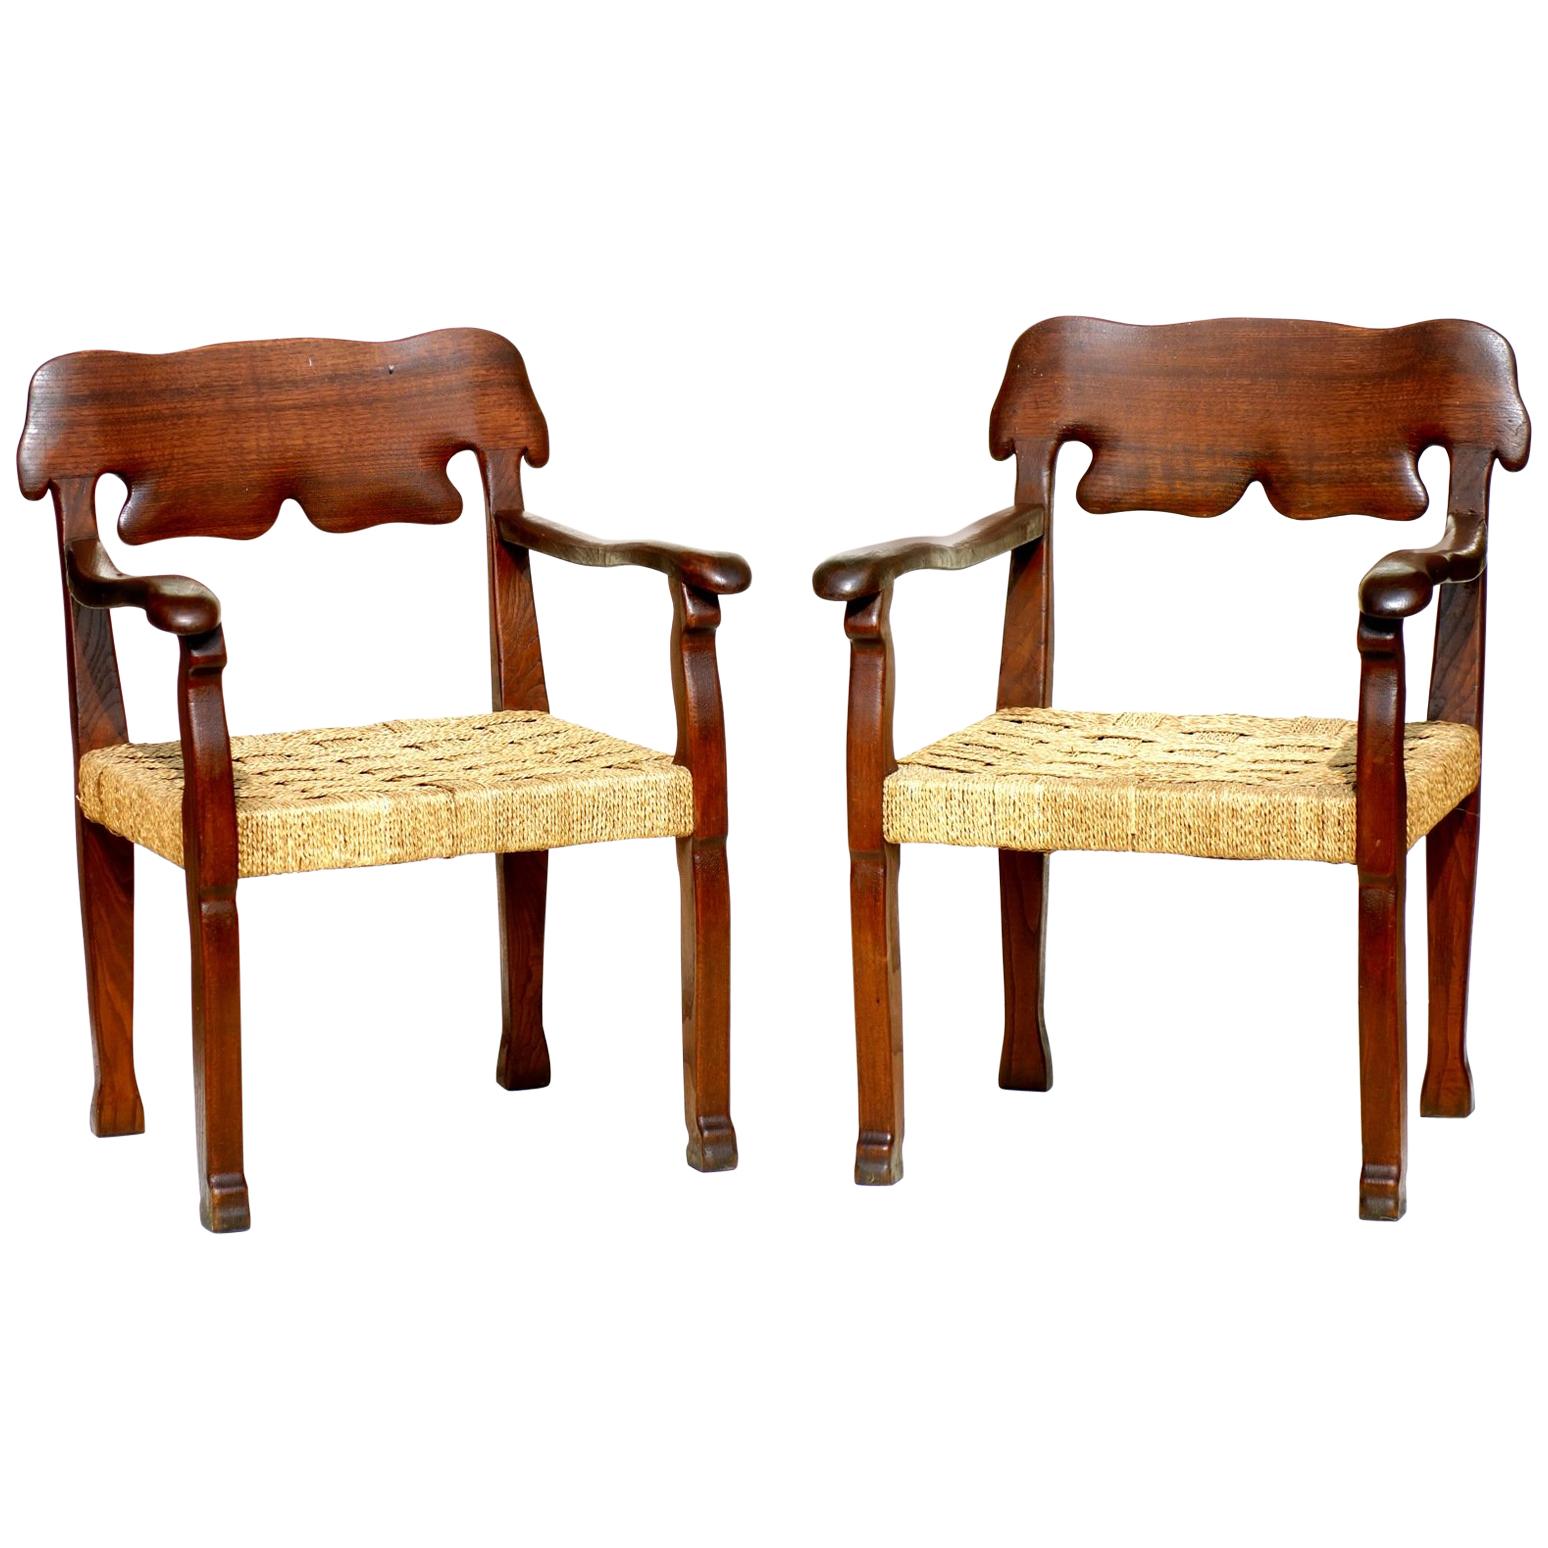 1940s Italian Design Gaudì Style Rope and Wood Pair of Chairs